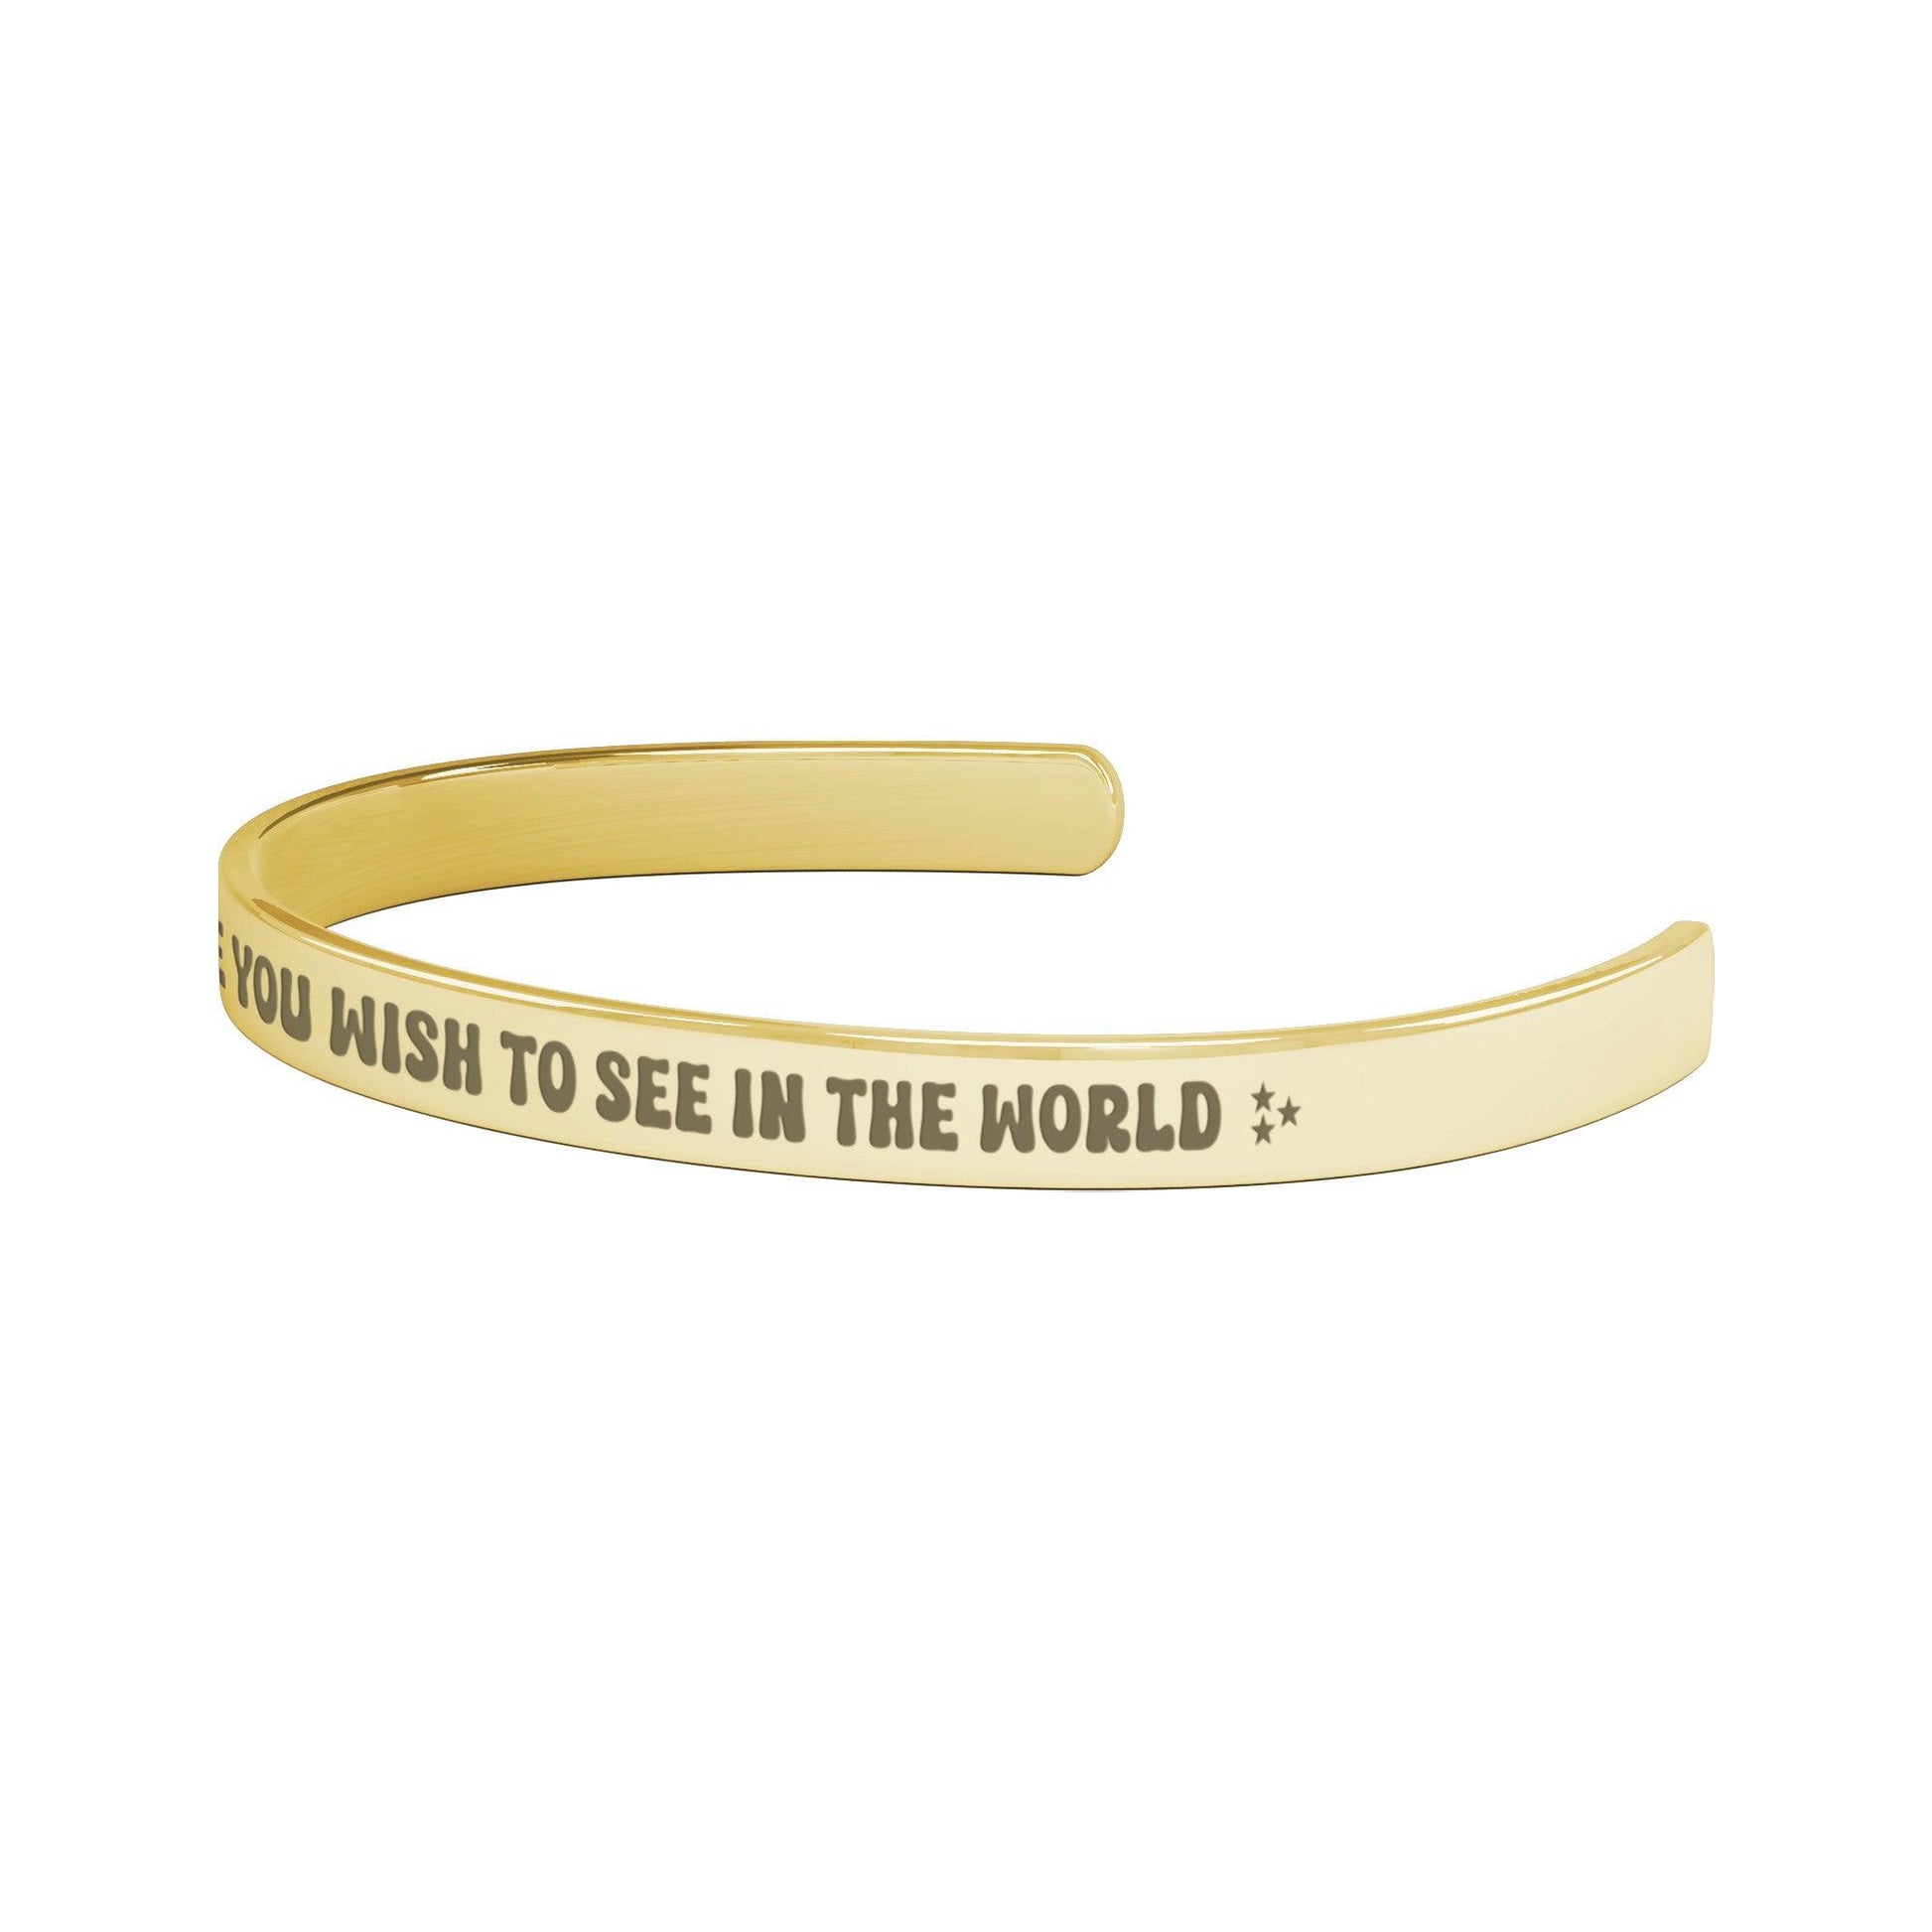 Inspirational Jewelry Cuff Bracelet Gift - Be the change you wish to see in the world Cuff Bracelet - Giftsmojo